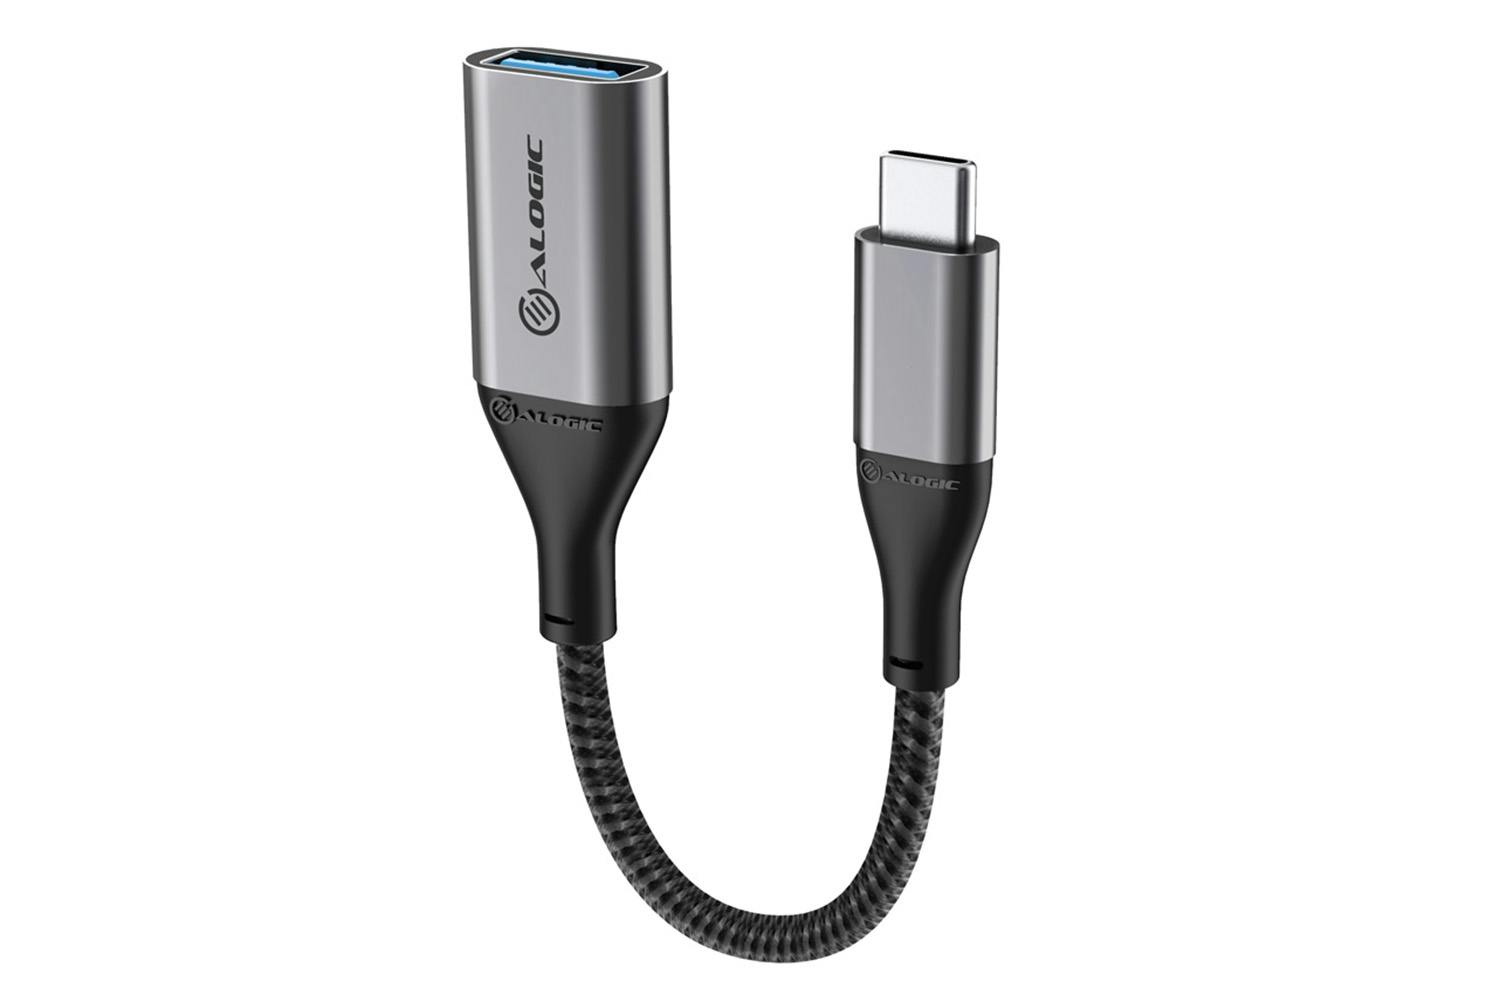 Micro USB to USB 3.1 C Adapter For Sale Online in Ireland